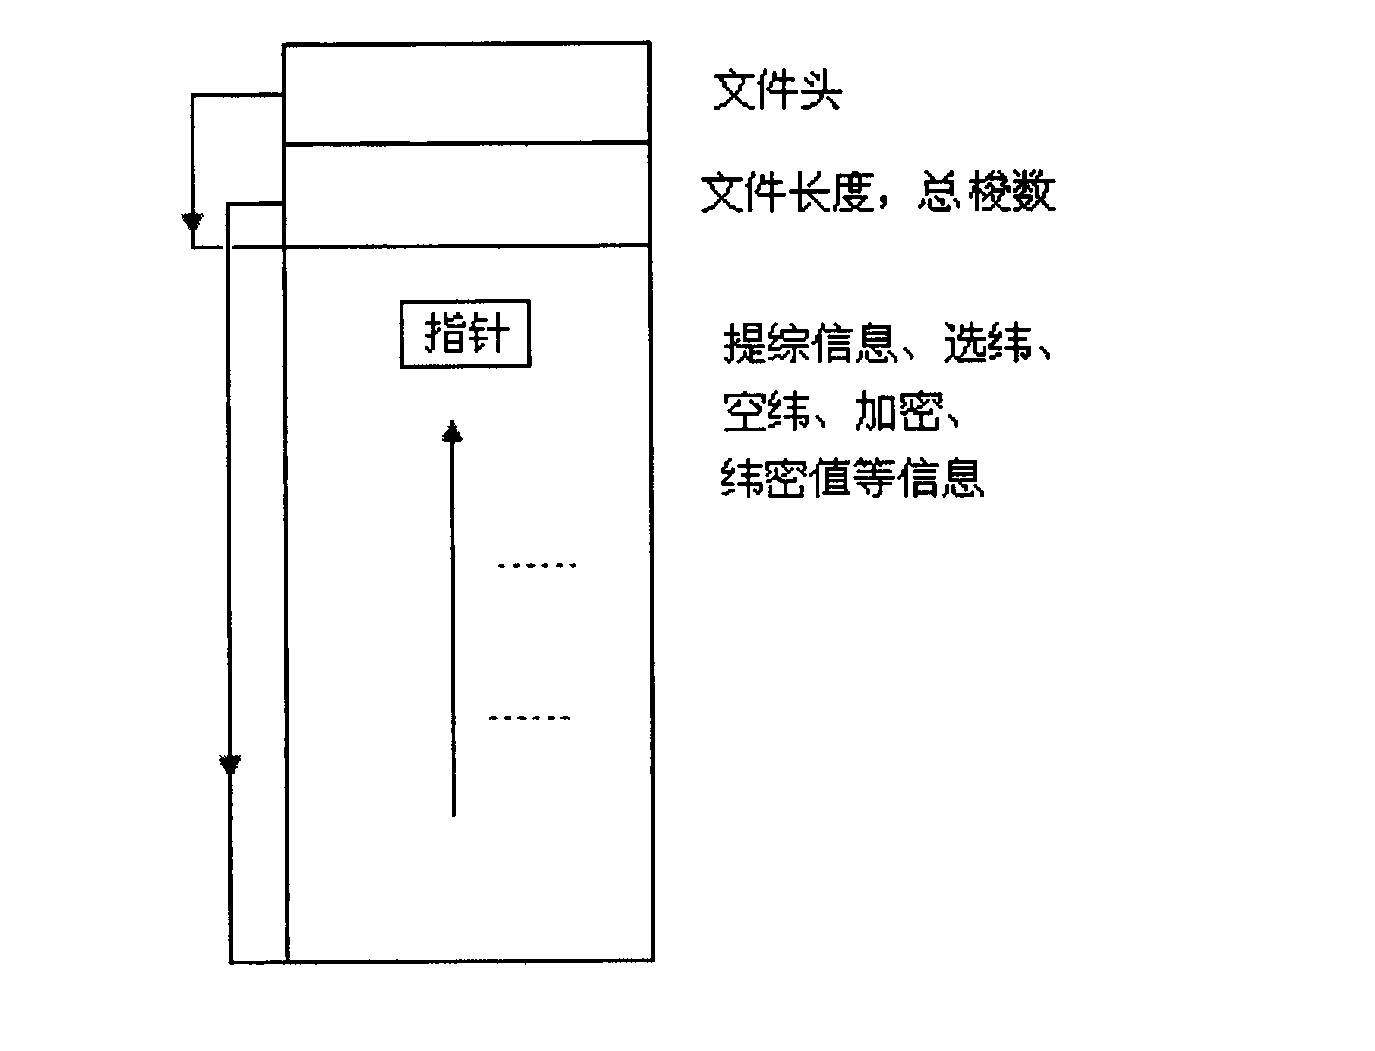 Lifting plan process file format for full-automatic water-jet sample looms